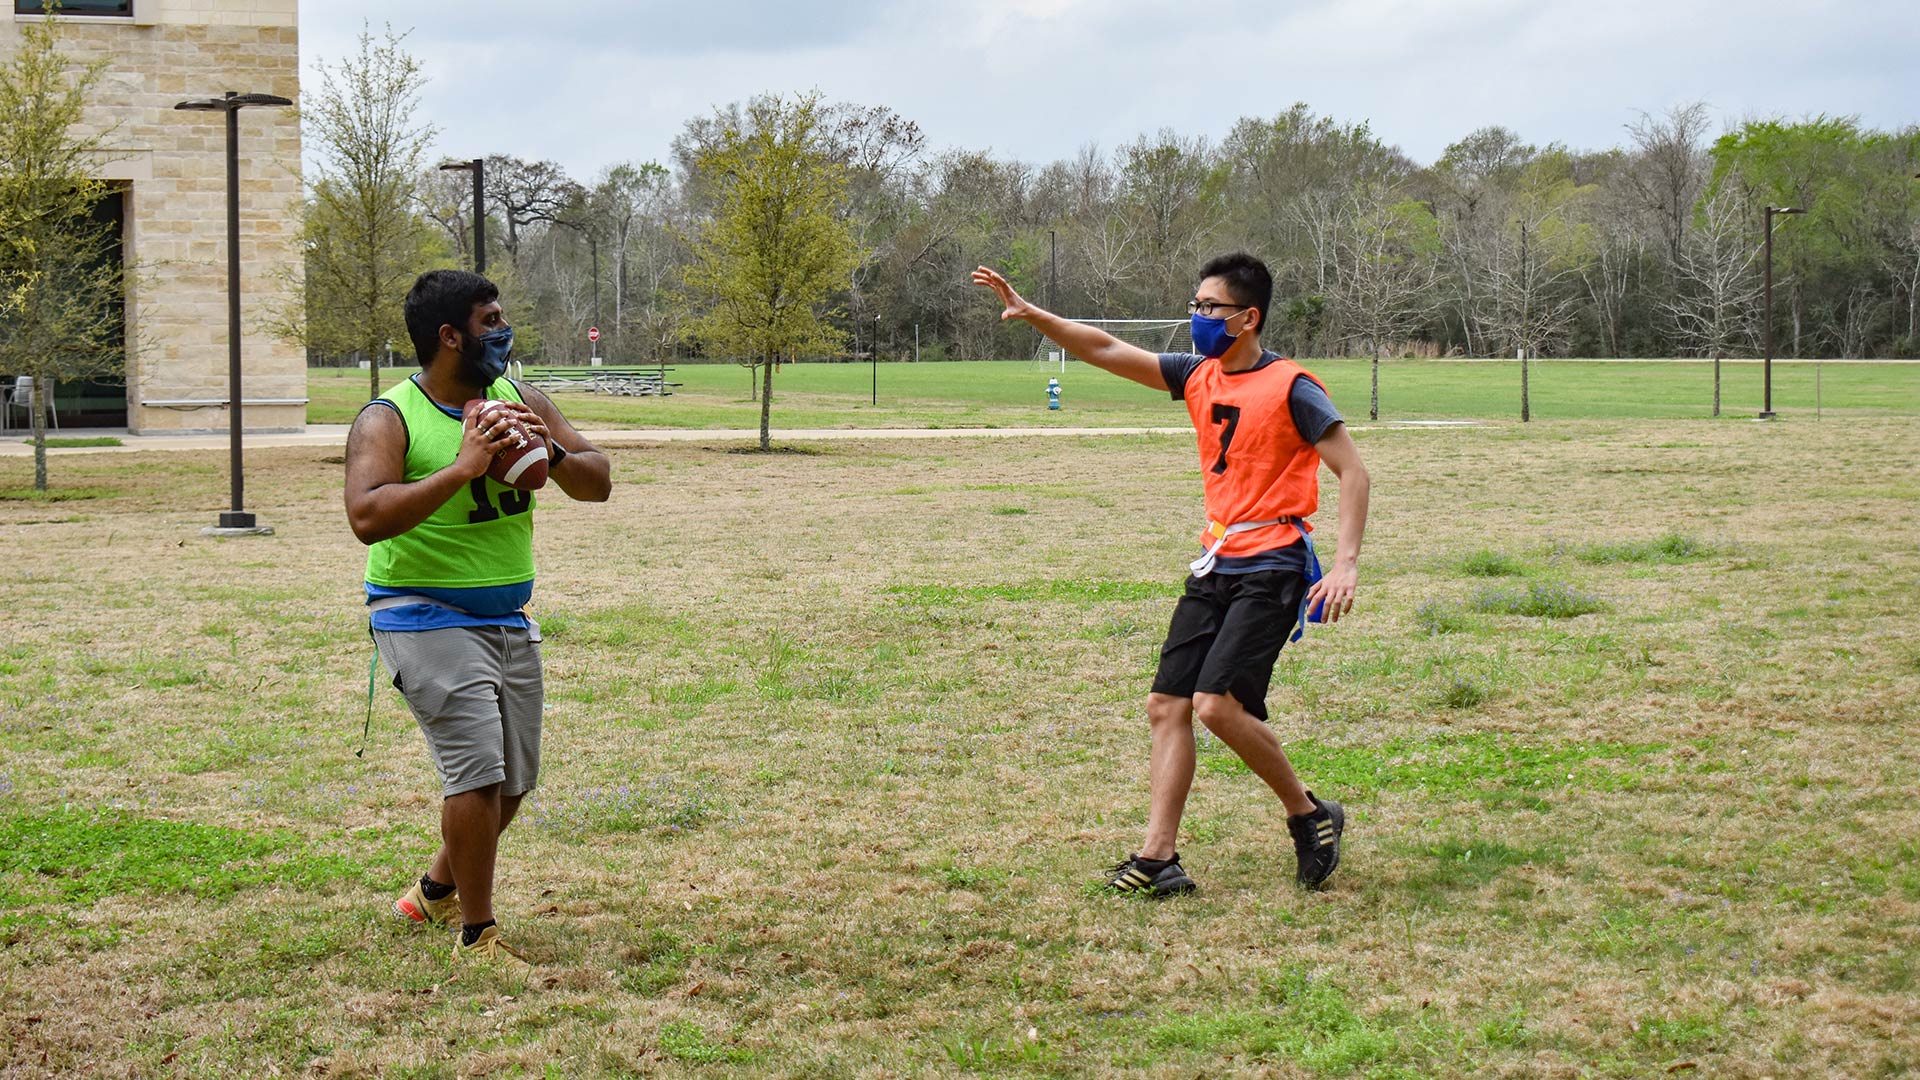 UHCL students playing tag football.